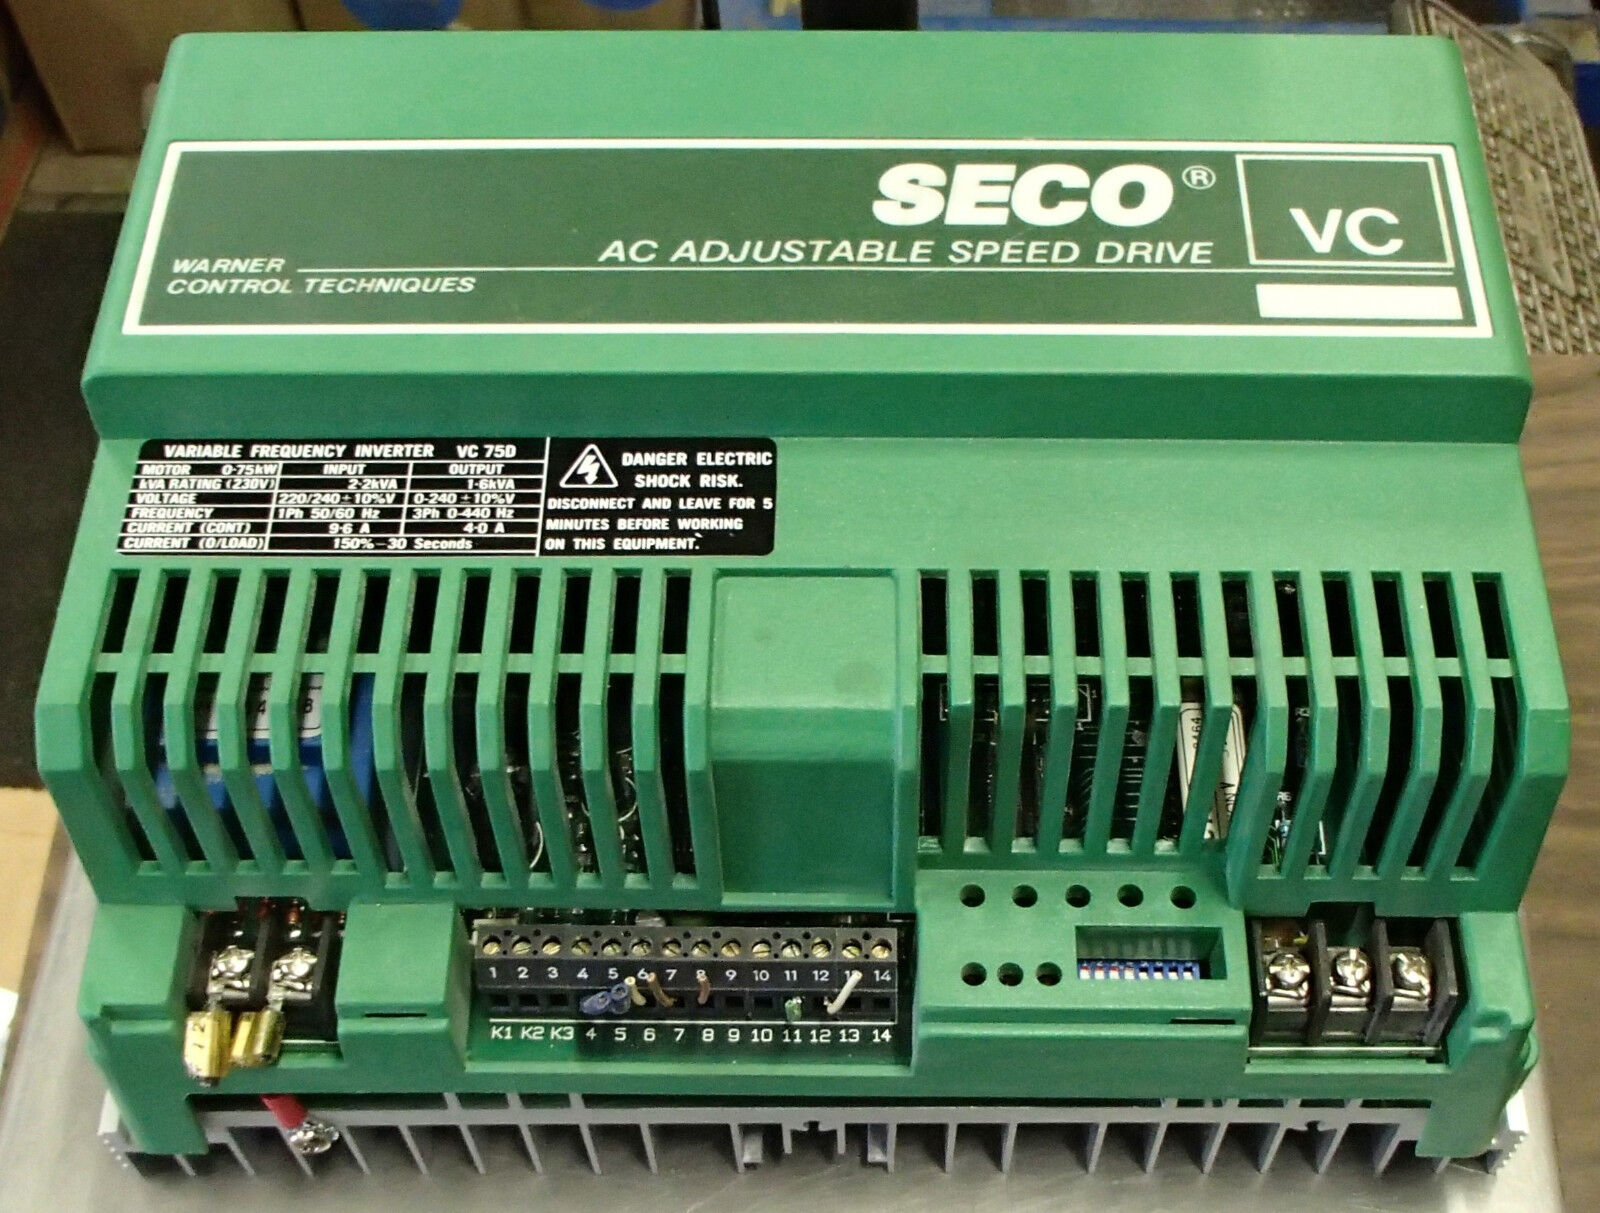 Seco Warner Control AC Adjustable Speed Drive Variable Frequency Inverter VC750